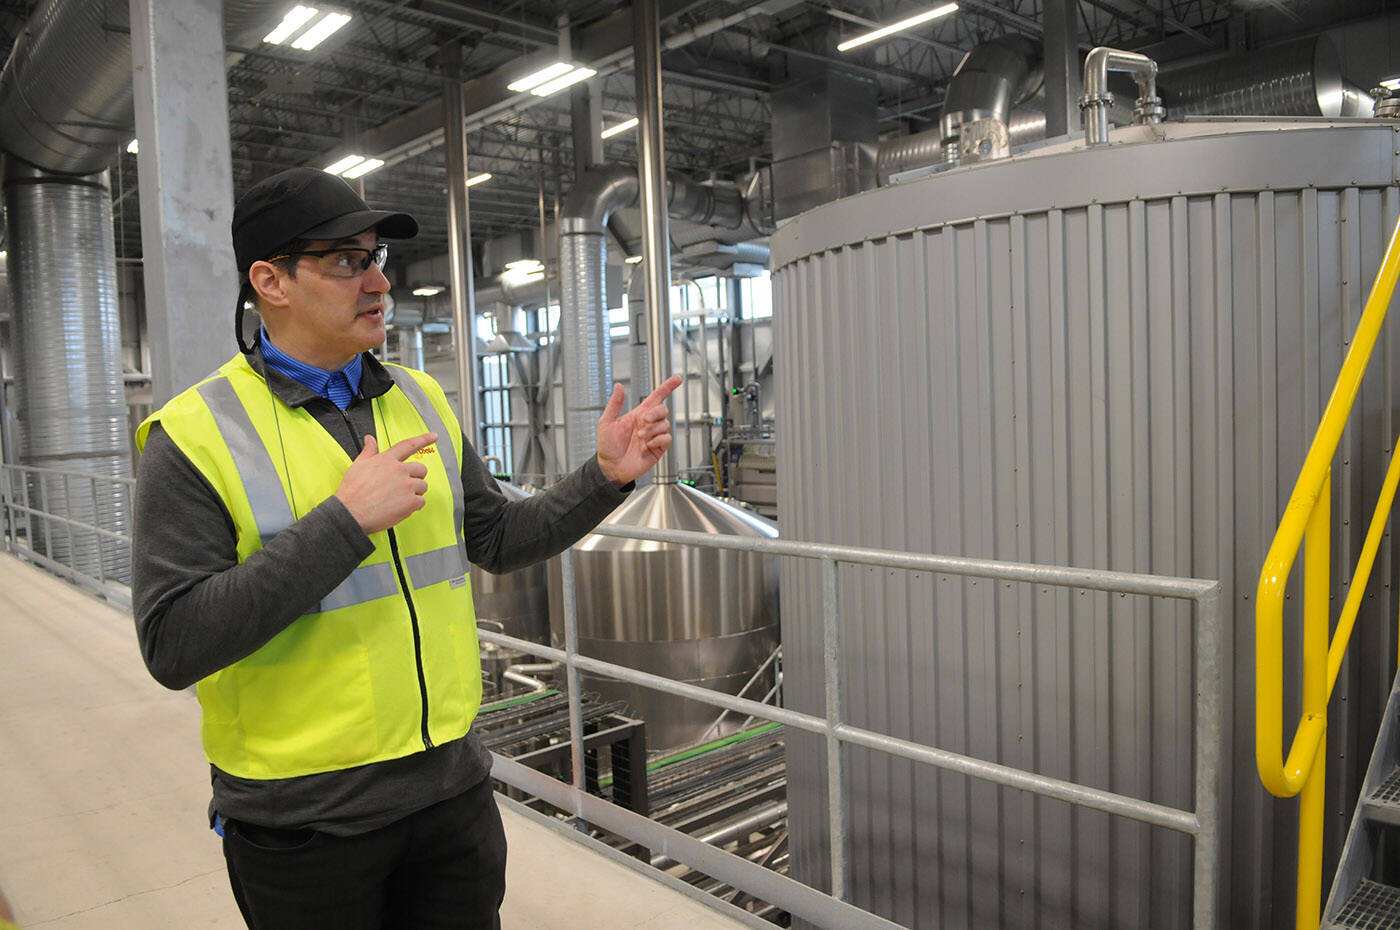 David Hamel, Molson Coors general manager of operations for Western Canada, is seen on March 17, 2022 by a tank (right) that was converted to produce malt and spirit-based beverages at the Chilliwack brewery. (Jenna Hauck/ Chilliwack Progress)